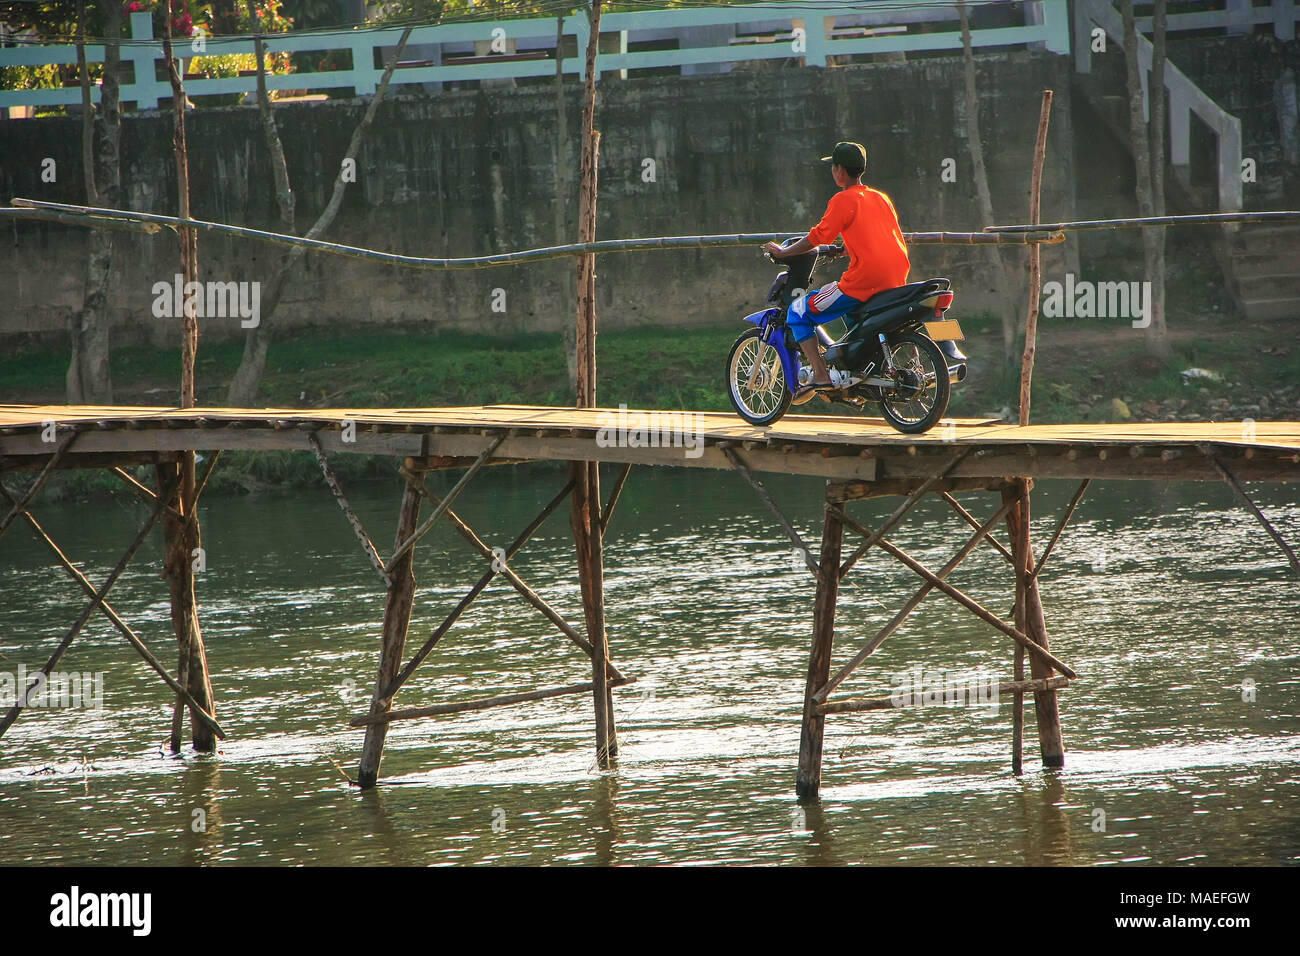 Local man riding motorbike on the bridge in Vang Vieng, Laos. Vang Vieng is a tourist-oriented town in Vientiane Province. Stock Photo